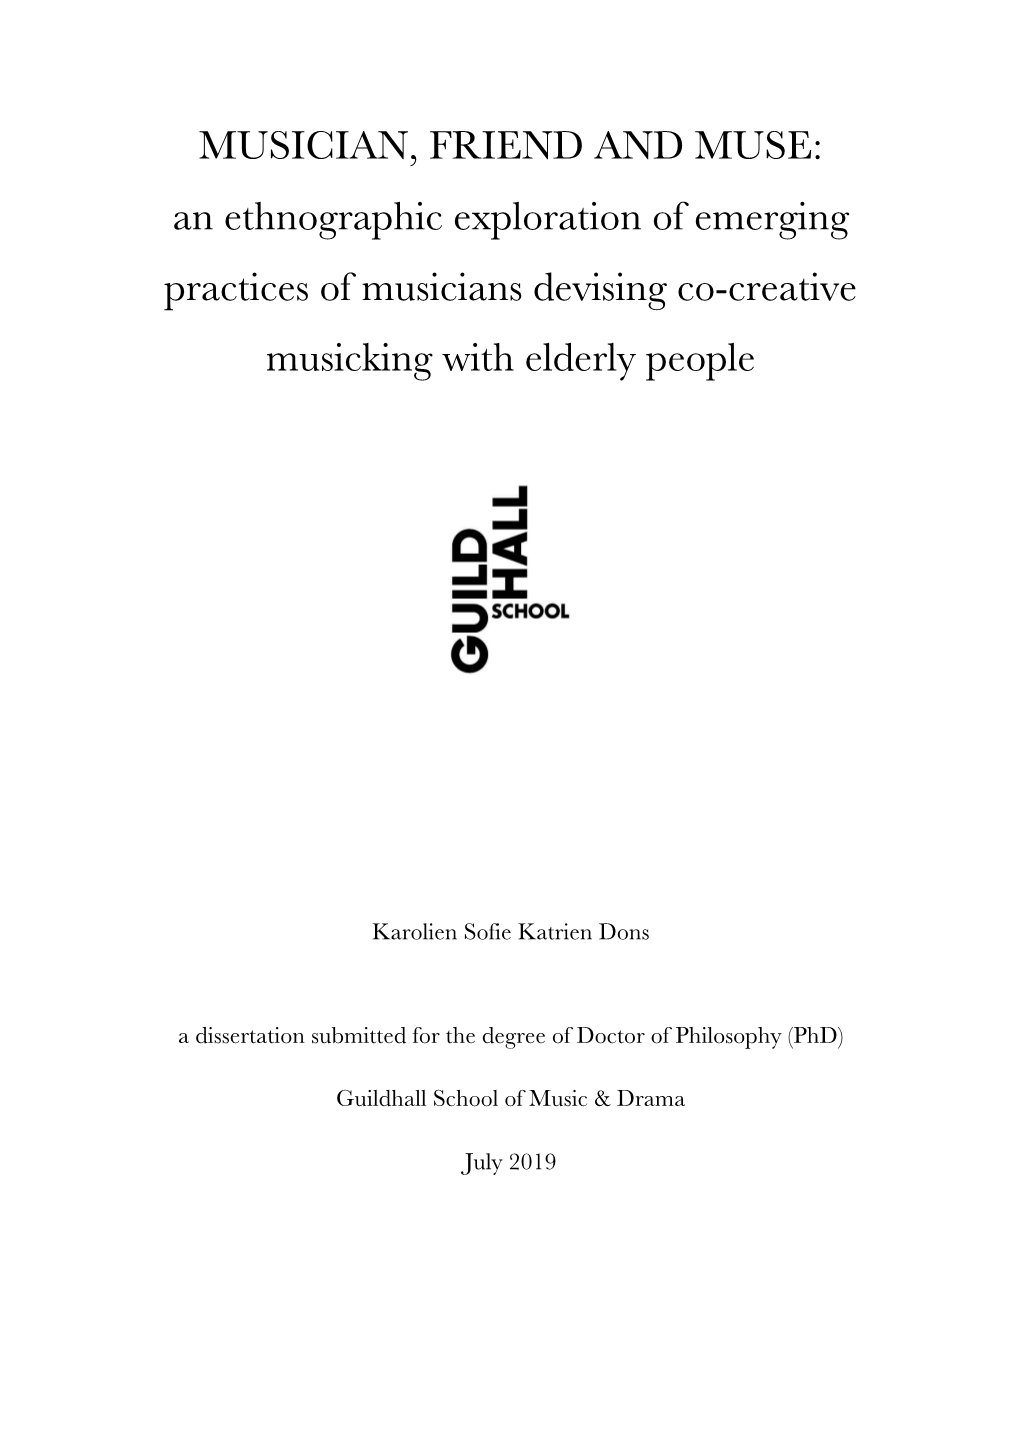 An Ethnographic Exploration of Emerging Practices of Musicians Devising Co-Creative Musicking with Elderly People